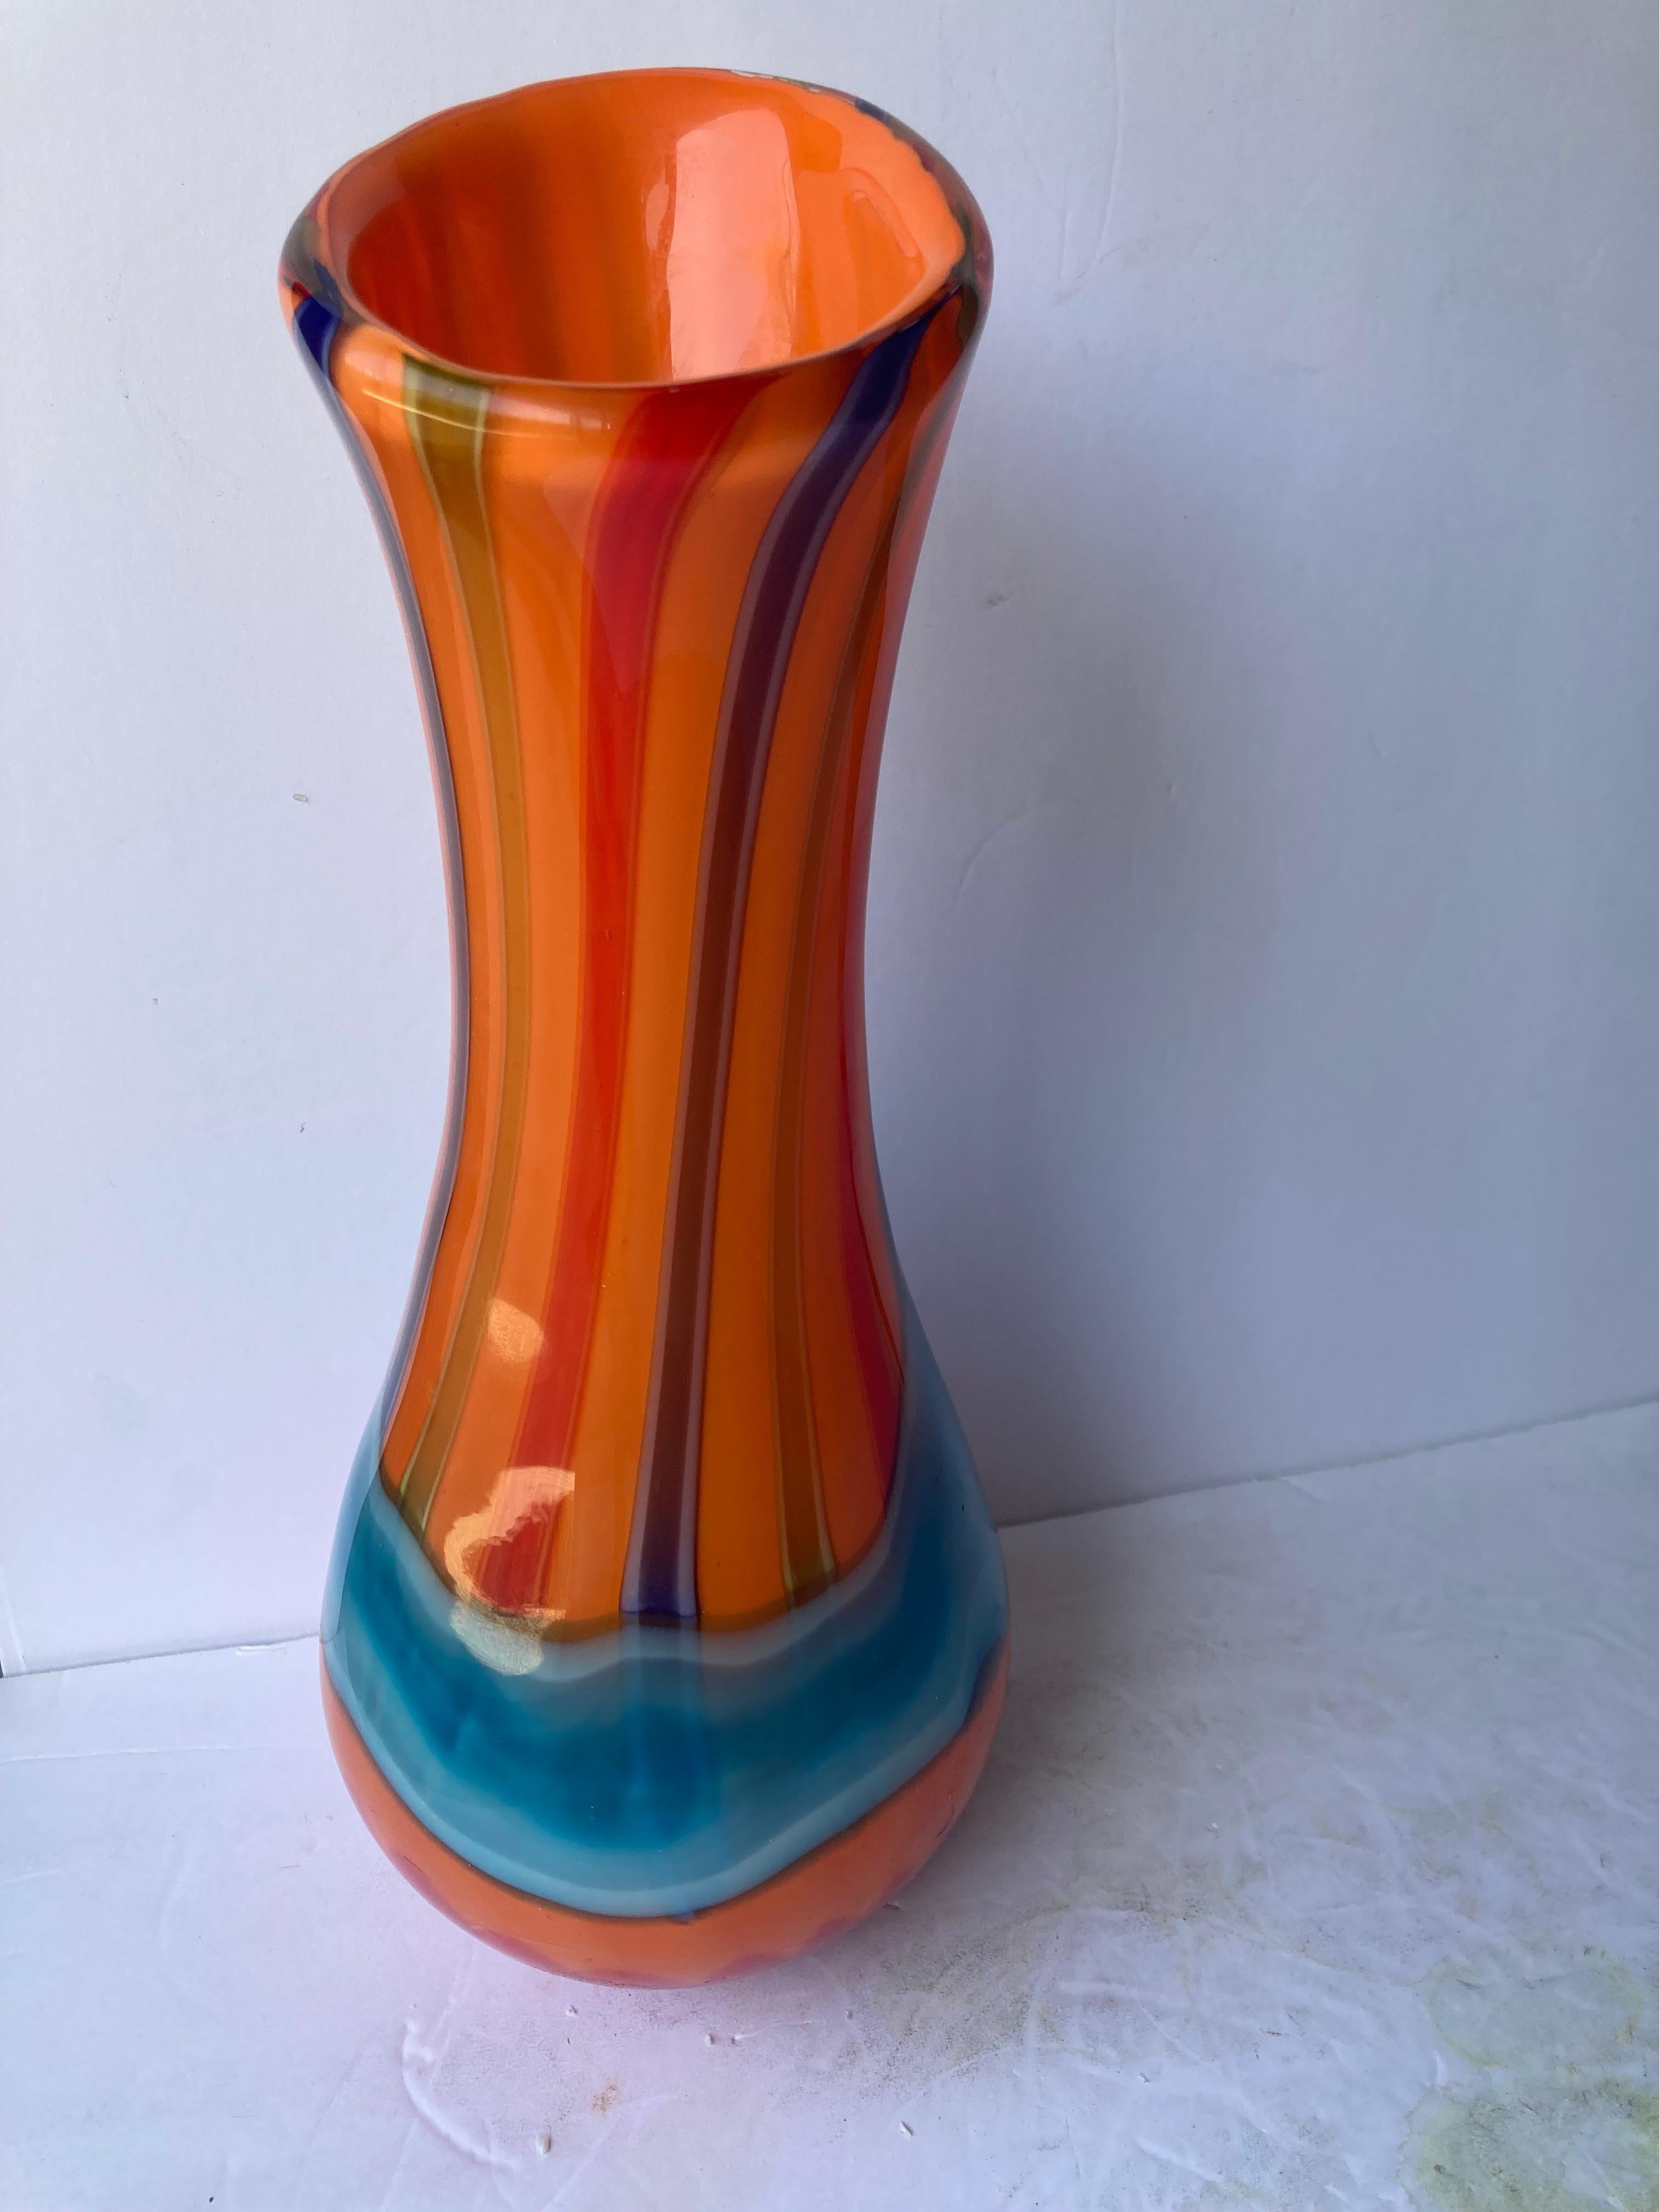 Very nice and large glass vase for a very well known glass blower artist.